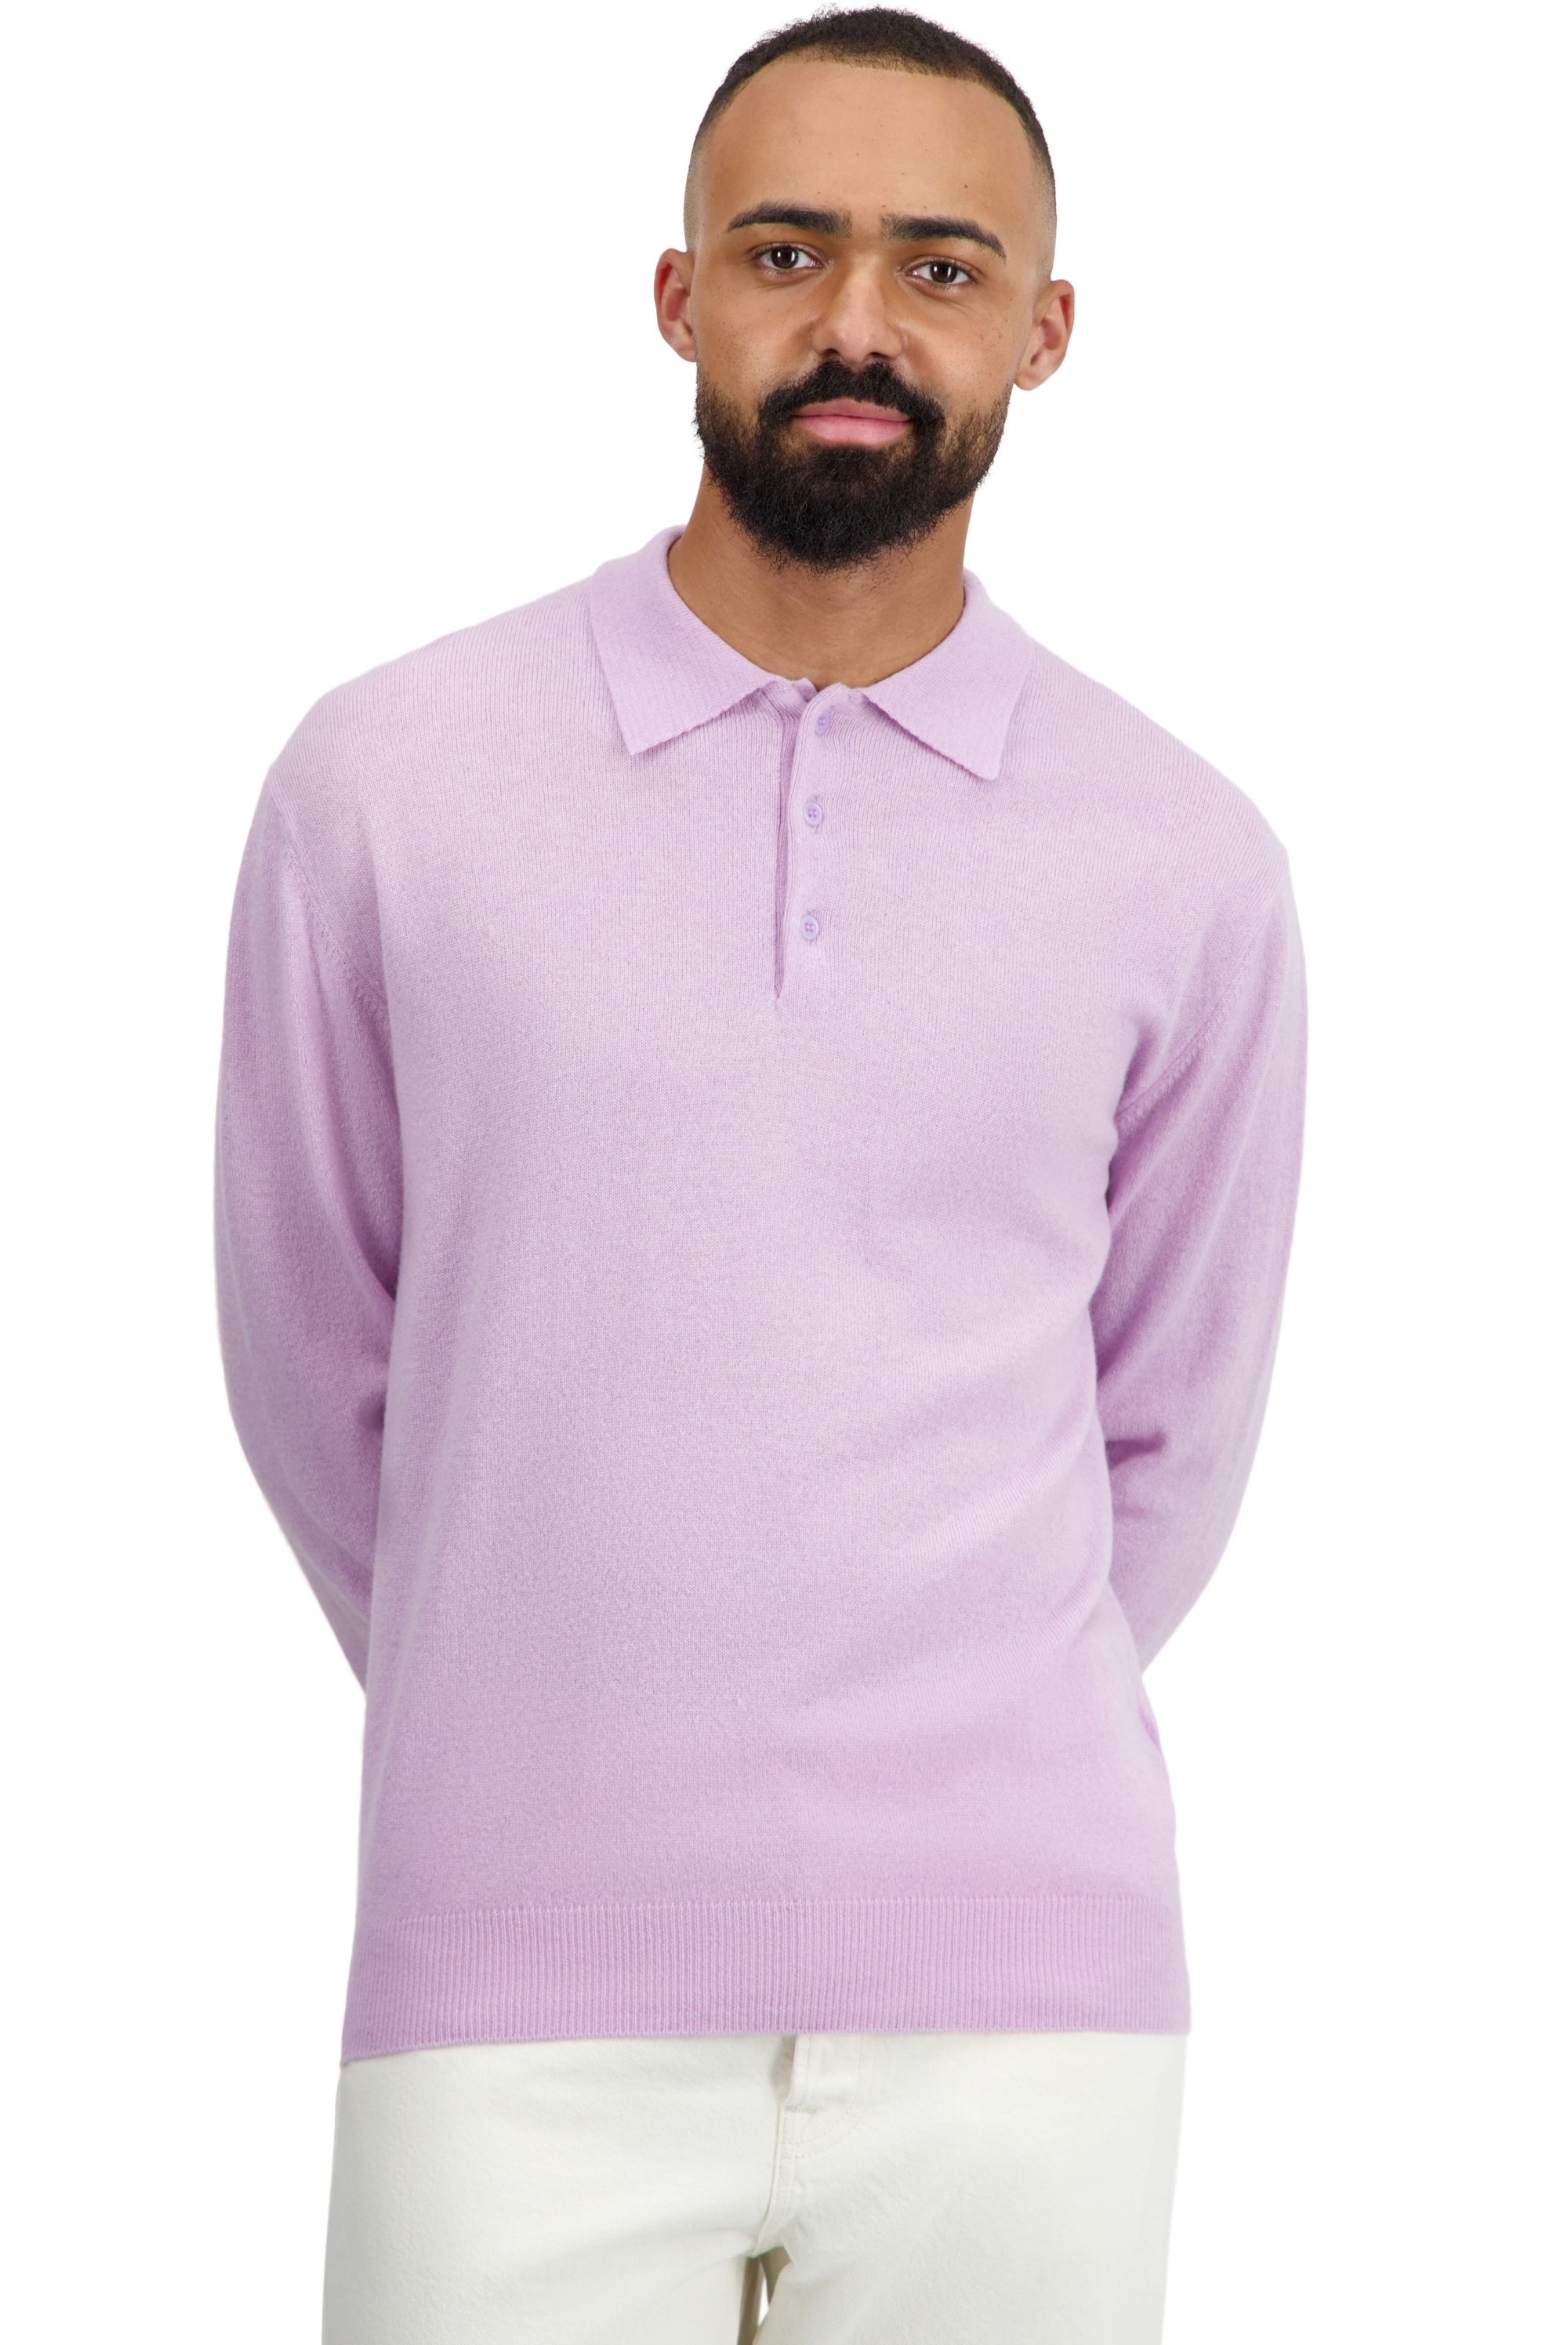 Cashmere men basic sweaters at low prices tarn first prism m